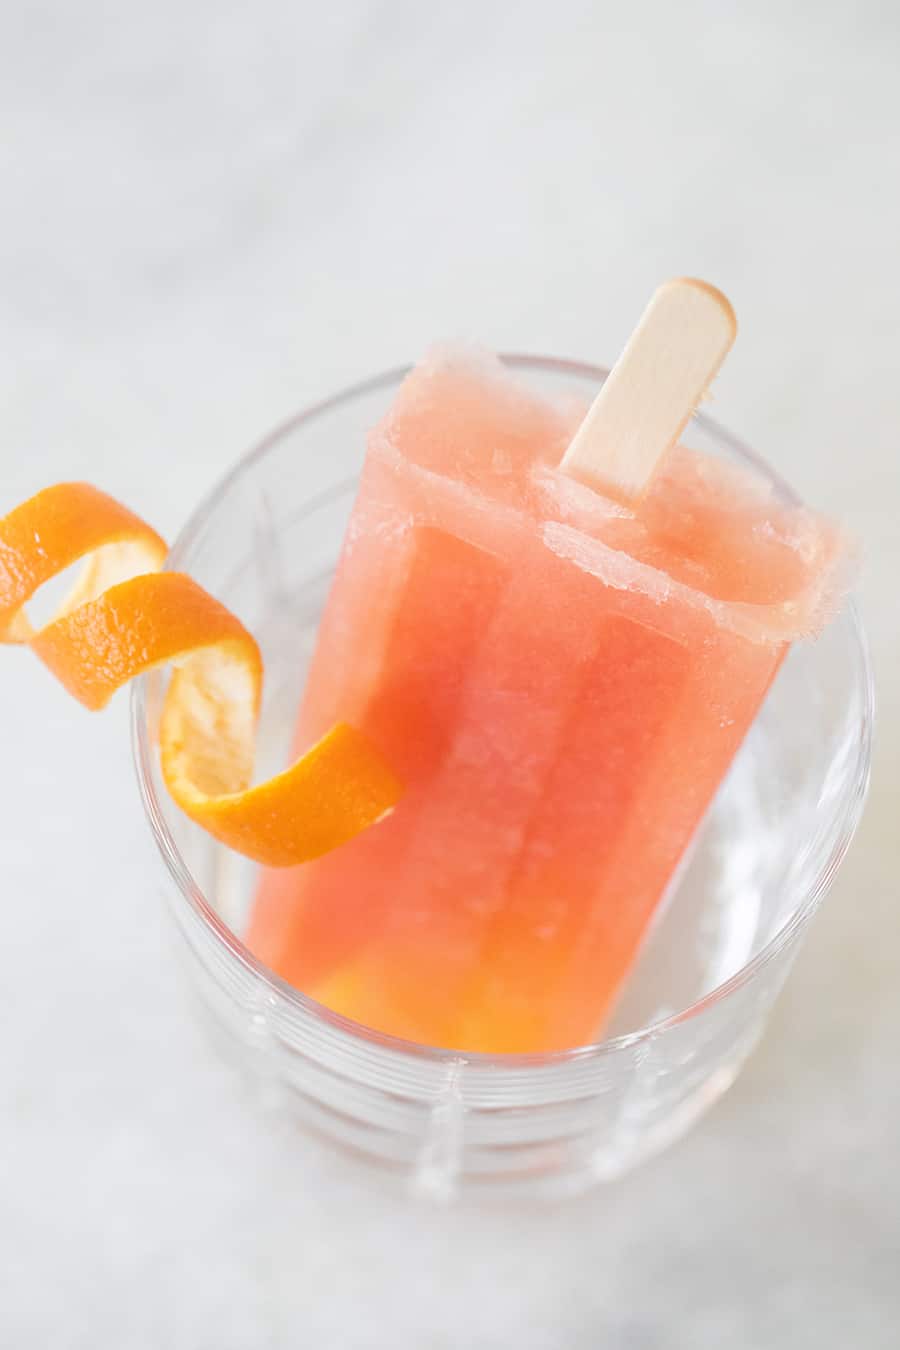 Grapefruit Negroni popsicle in glass with orange rind